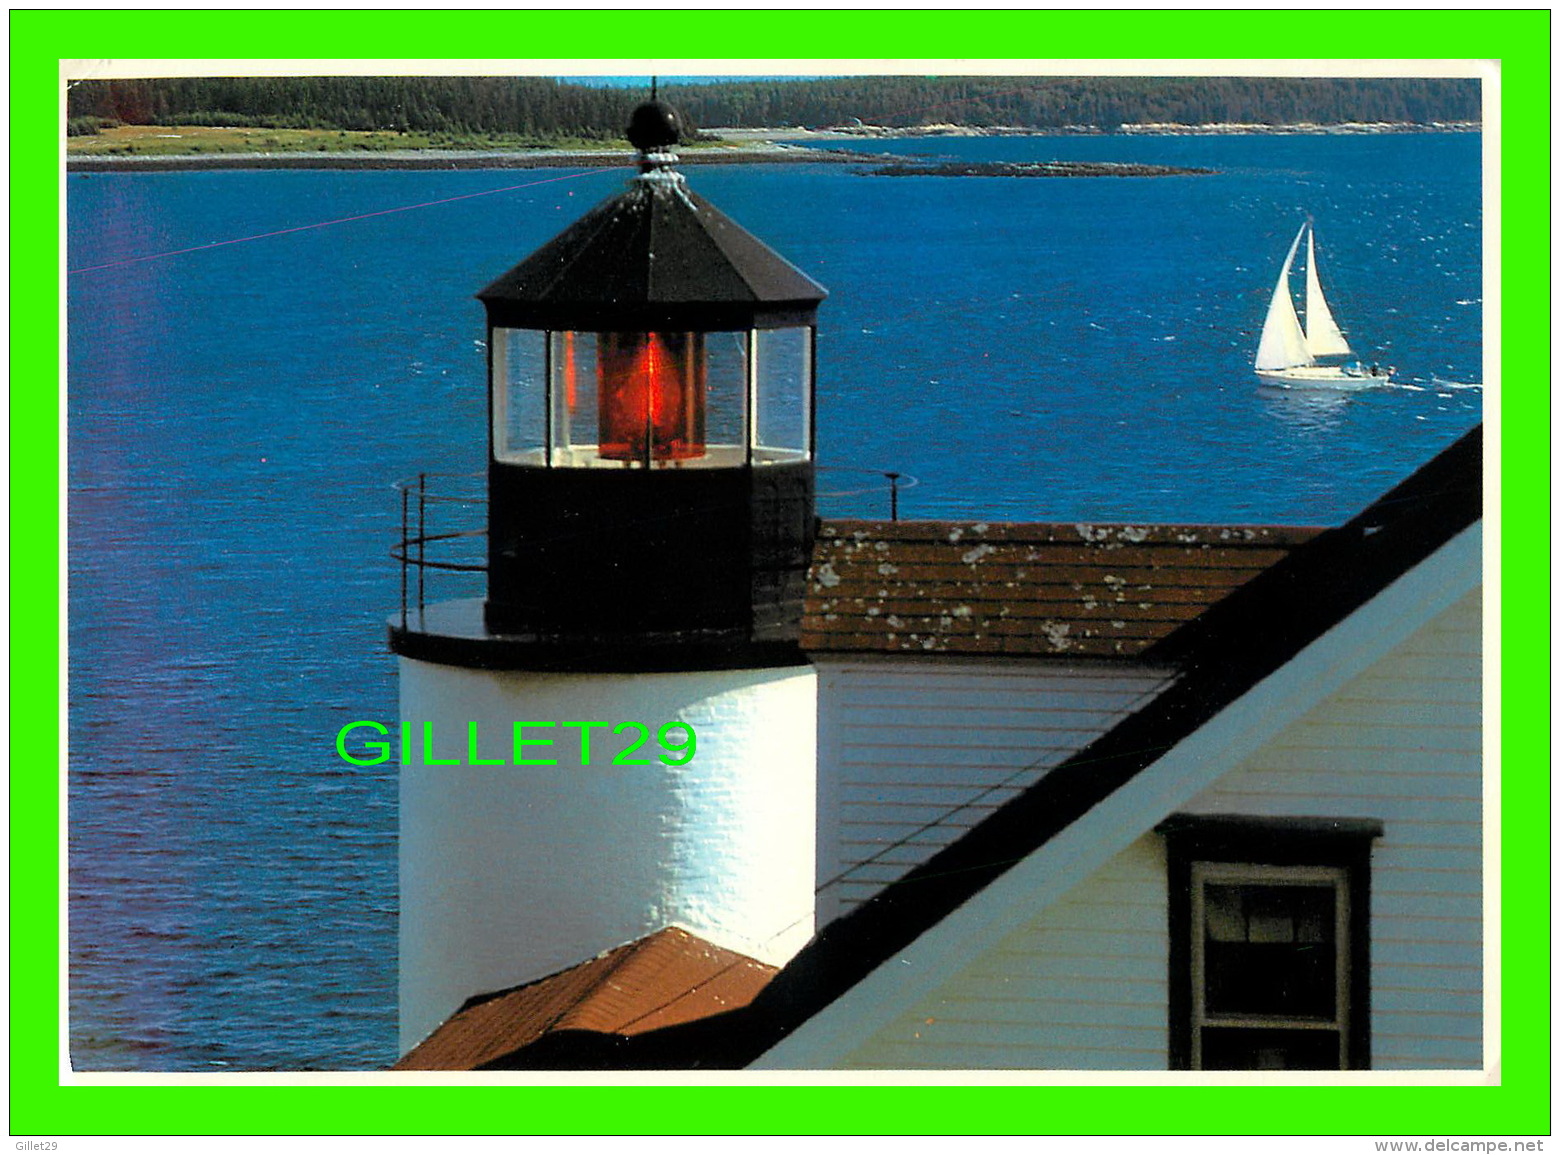 PHARES - LIGHTHOUSES - BASS HARBOR LIGHT, MAINE - TRAVEL IN 1986 - THE ACADIA SCHOOL OF PHOTOGRAPHY - - Lighthouses